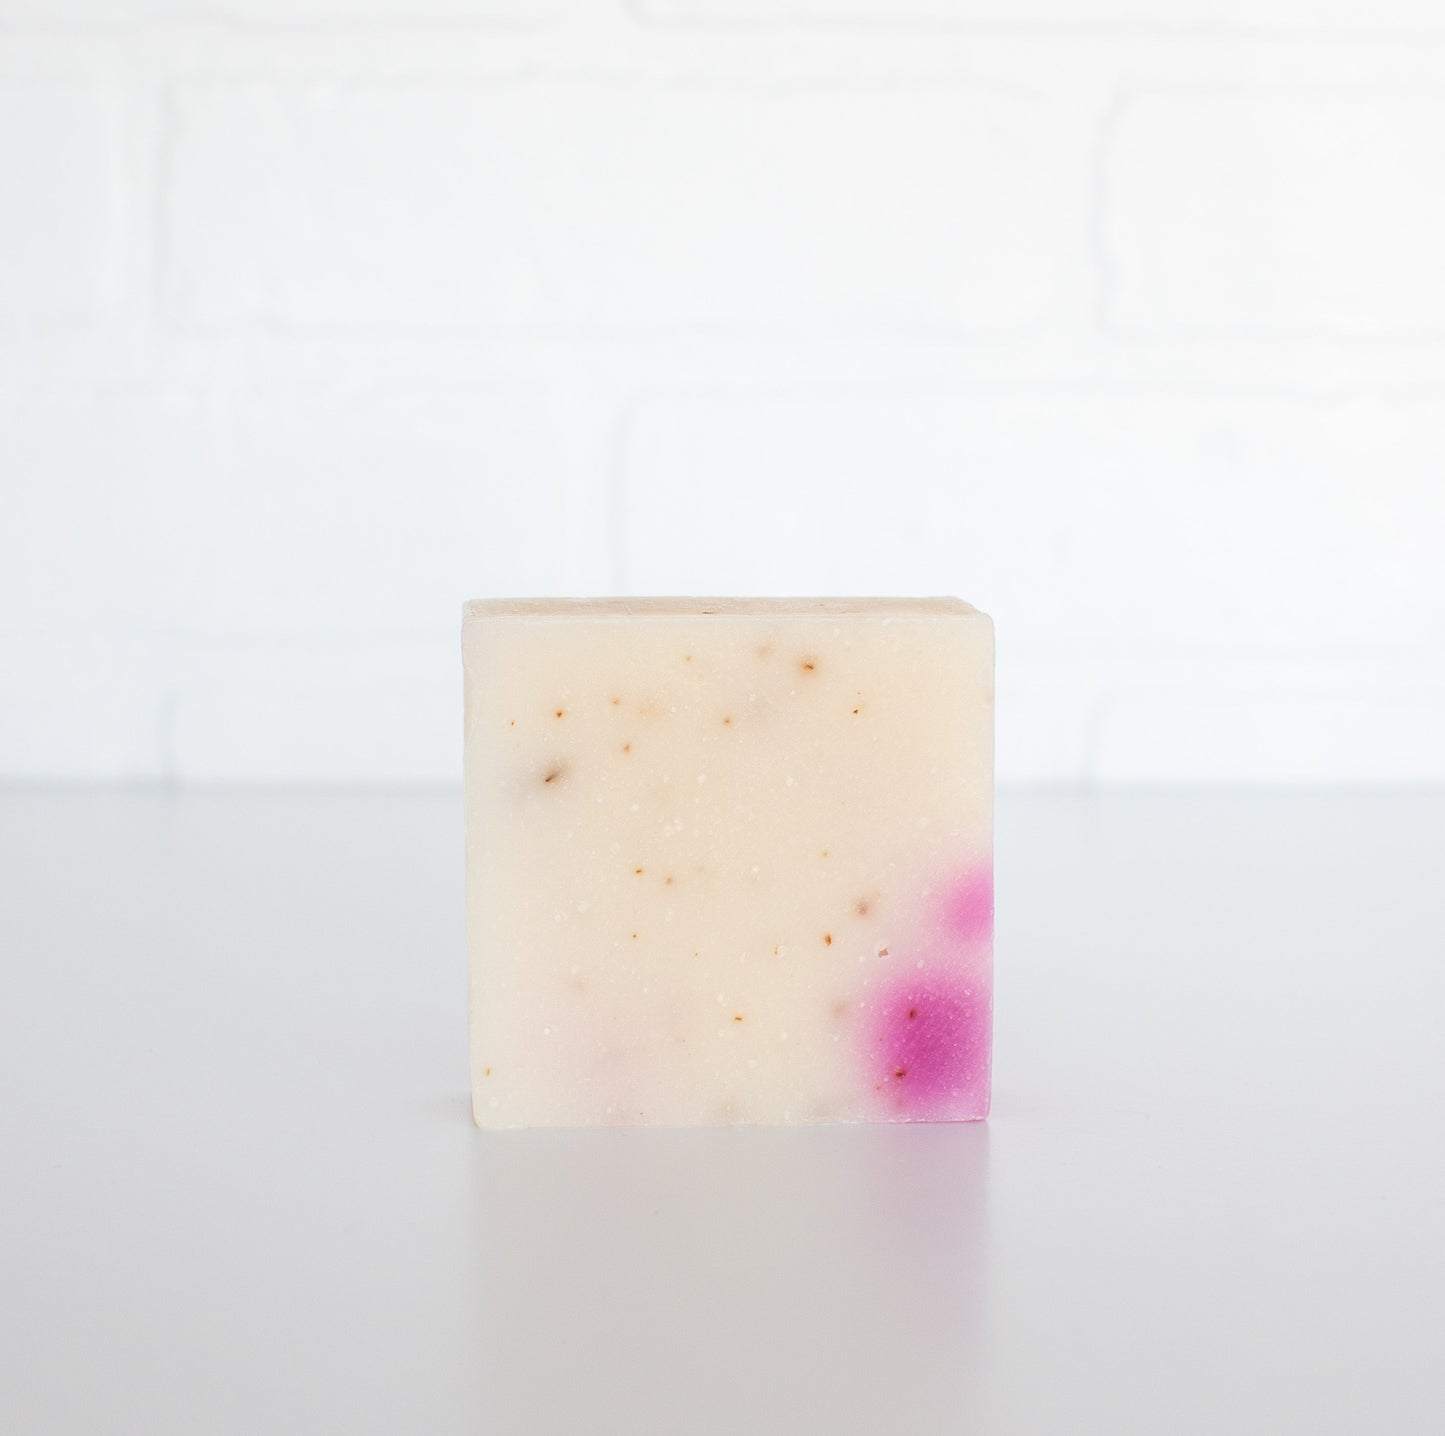 Olive Oil Soap - Wild Flower - ROOTE - Bar Soap